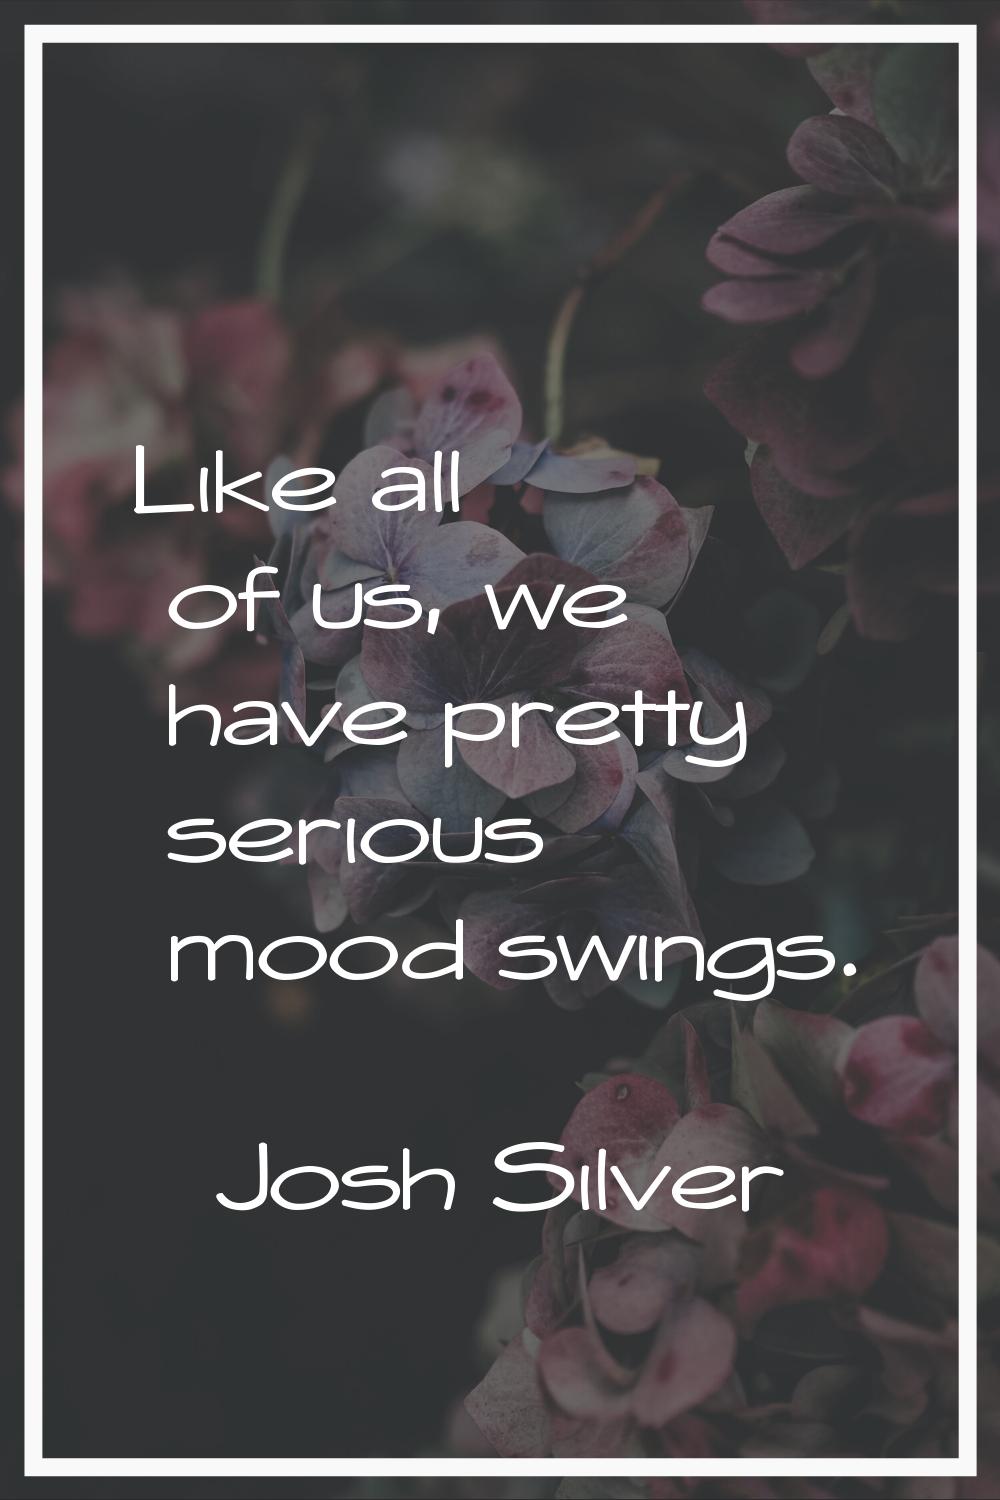 Like all of us, we have pretty serious mood swings.